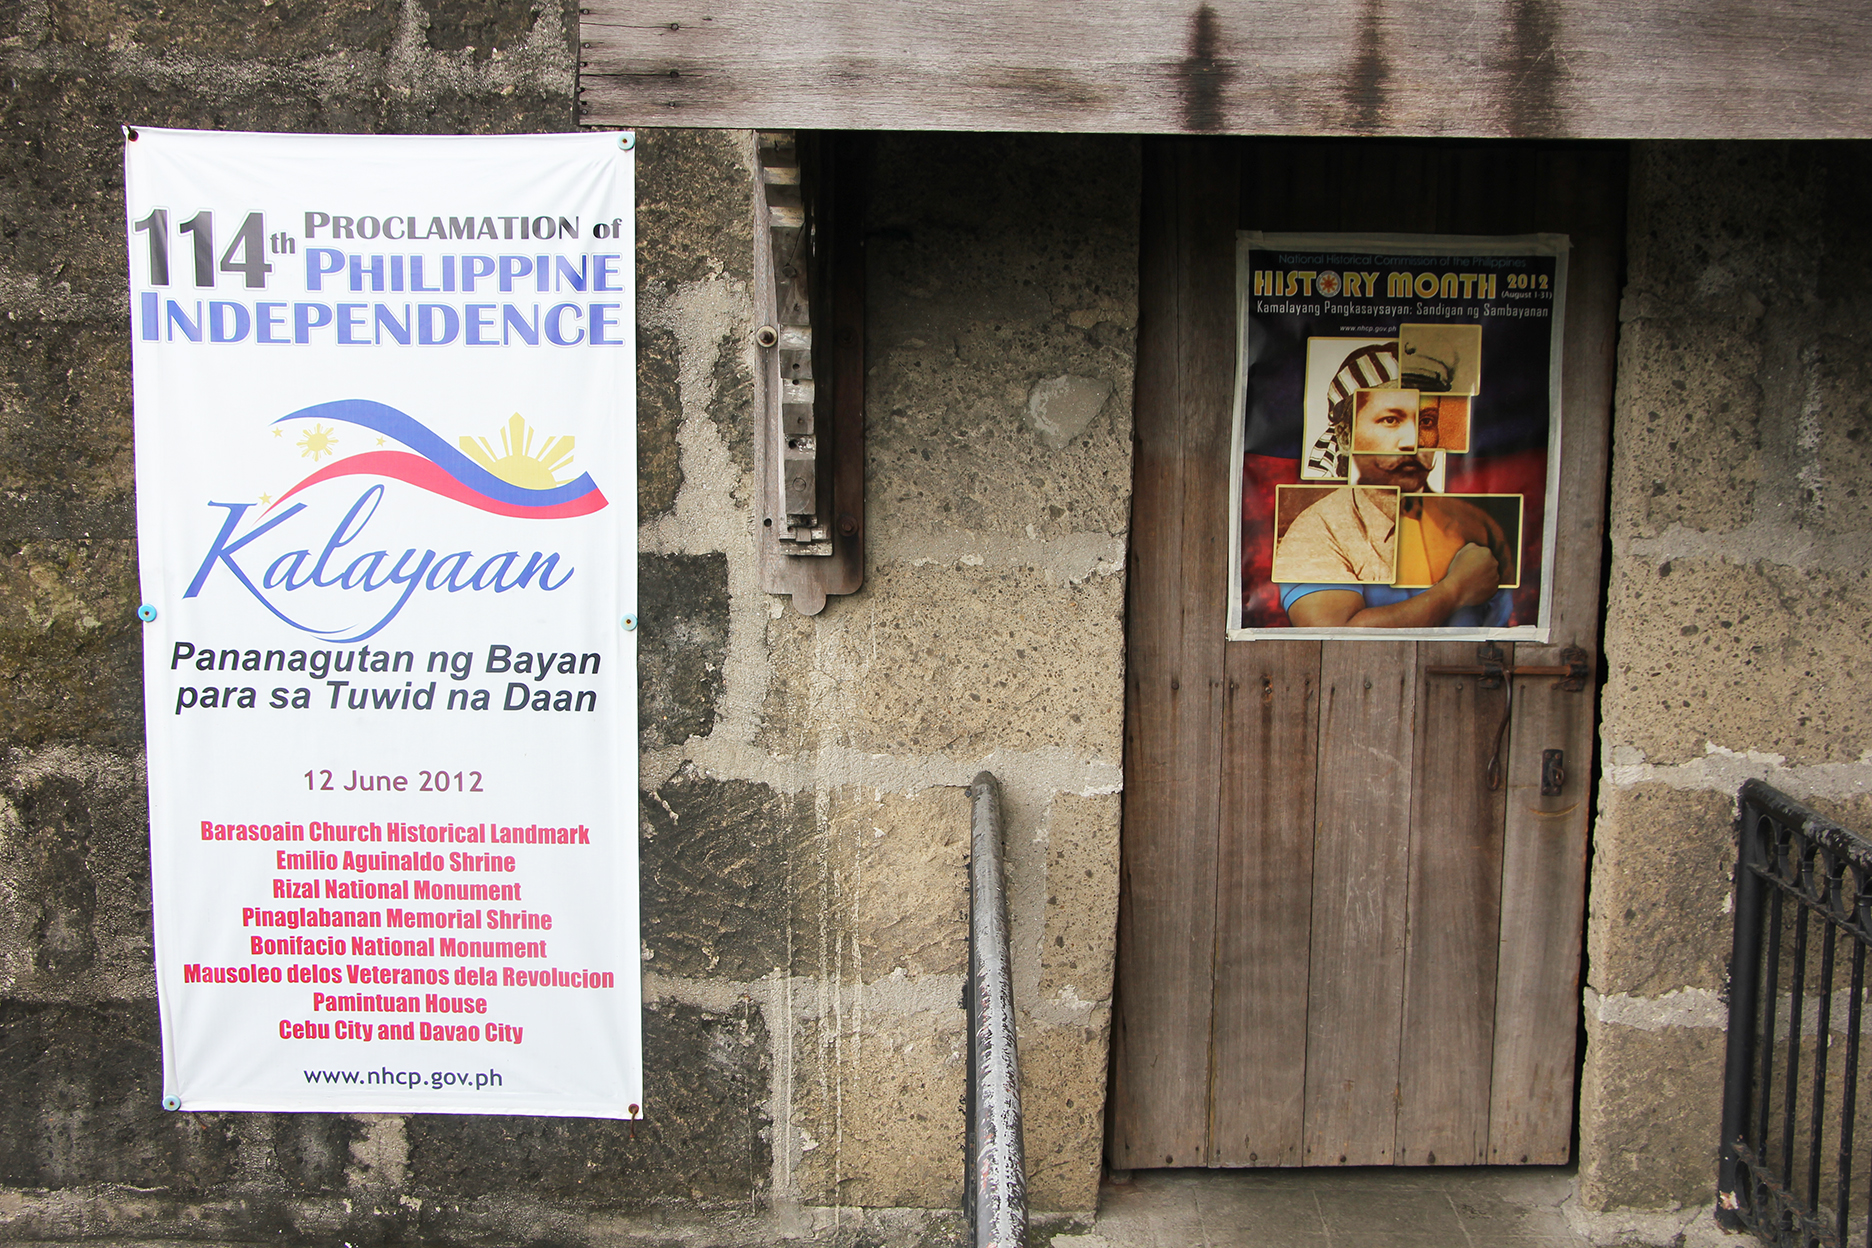 Sign for the 114th Proclamation of Philippine Independence.